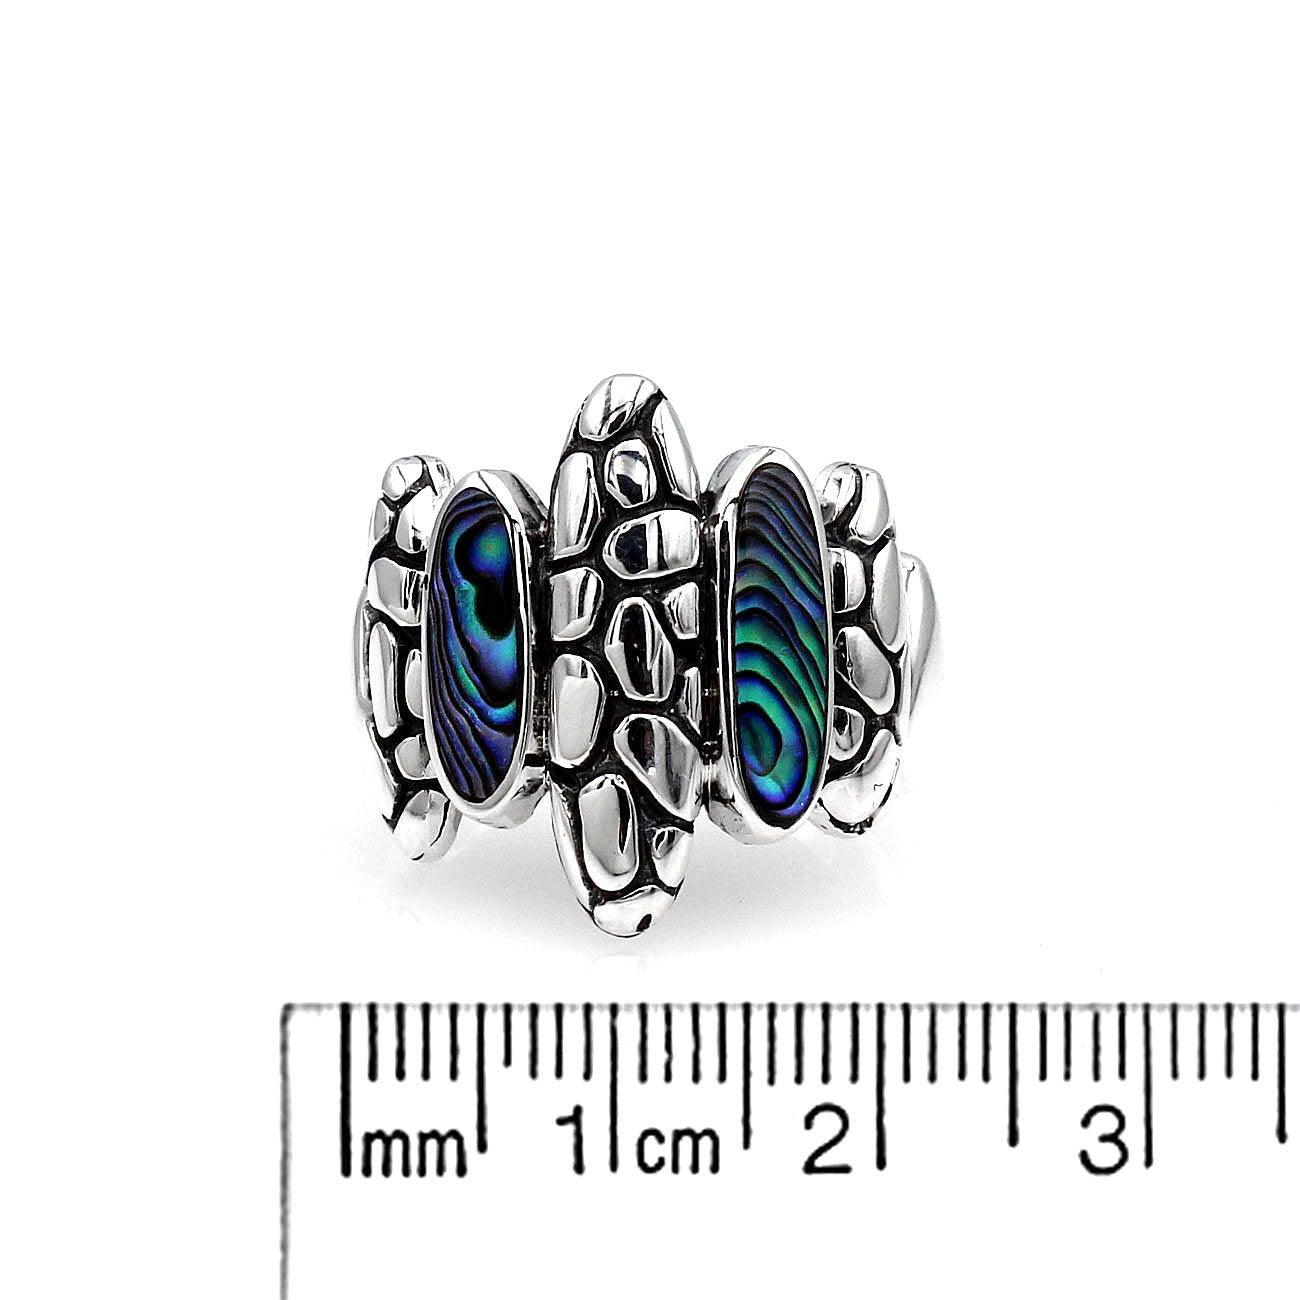 Bali Abalone Shell Inlay Cobblestone Cocktail Ring in 925 Sterling Silver - Size L , M , N , O , P , Q - Inspiring Jewellery